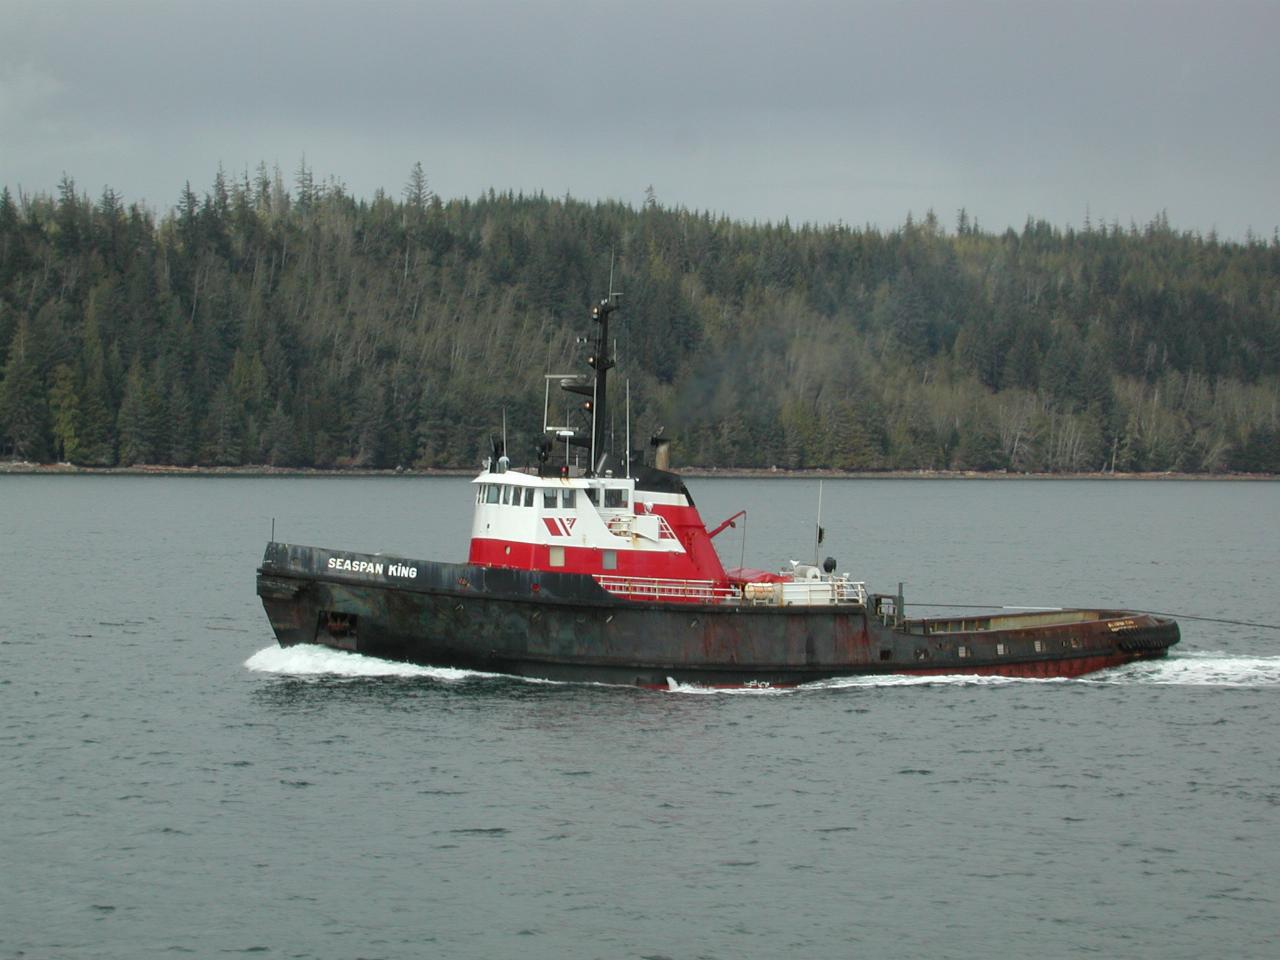 The tug towing the vessel being passed